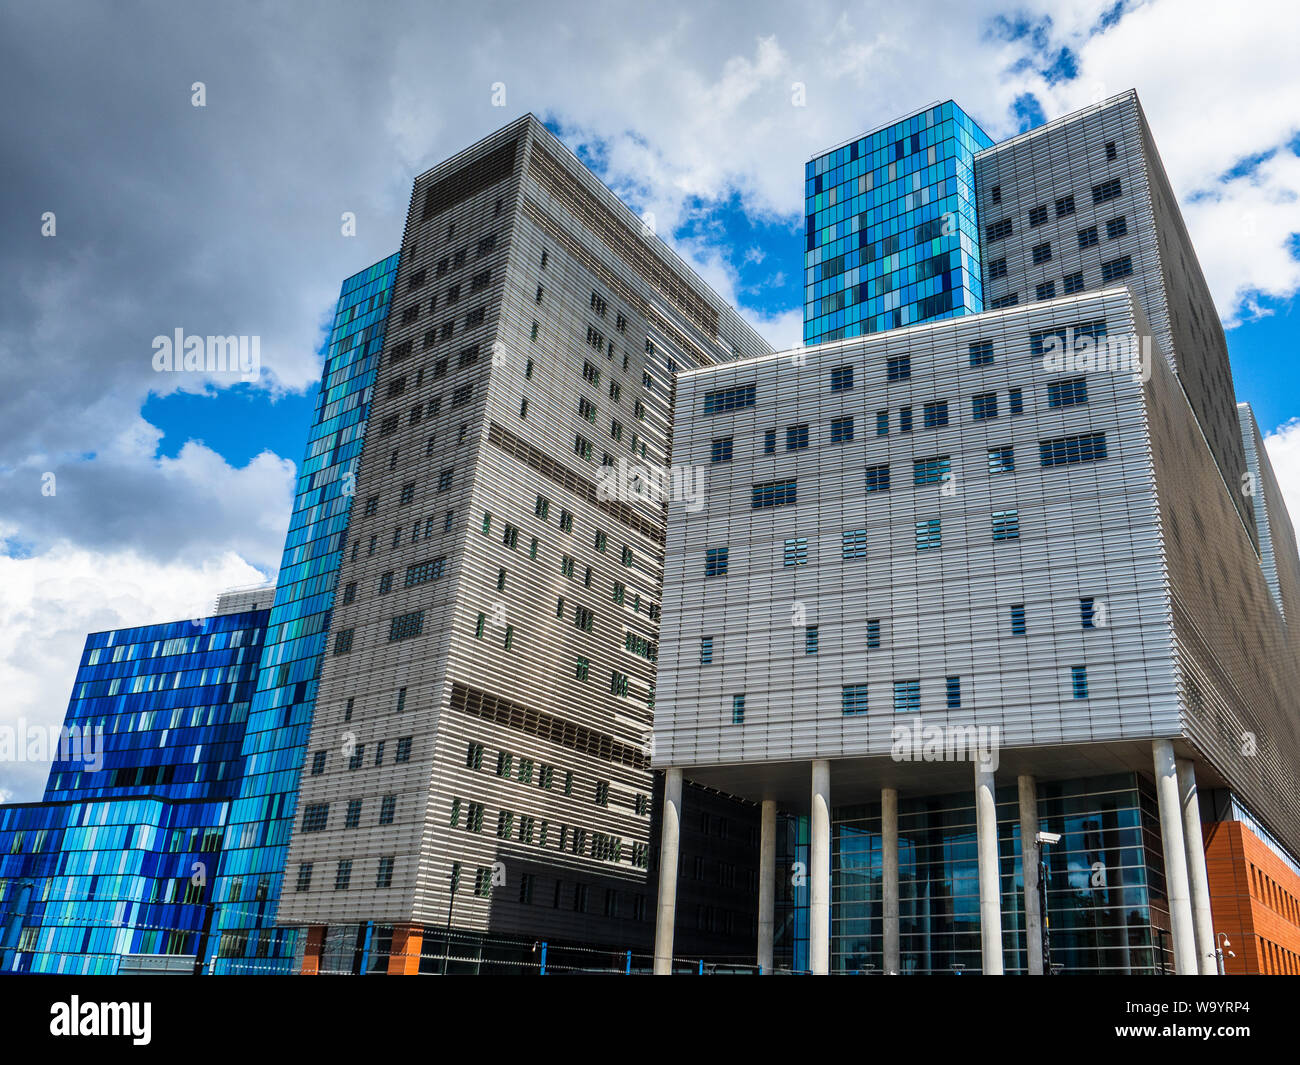 The Royal London Hospital in Whitechapel East London UK. Completed in 2012 the new building was designed by Skanska & HOK architects. Stock Photo